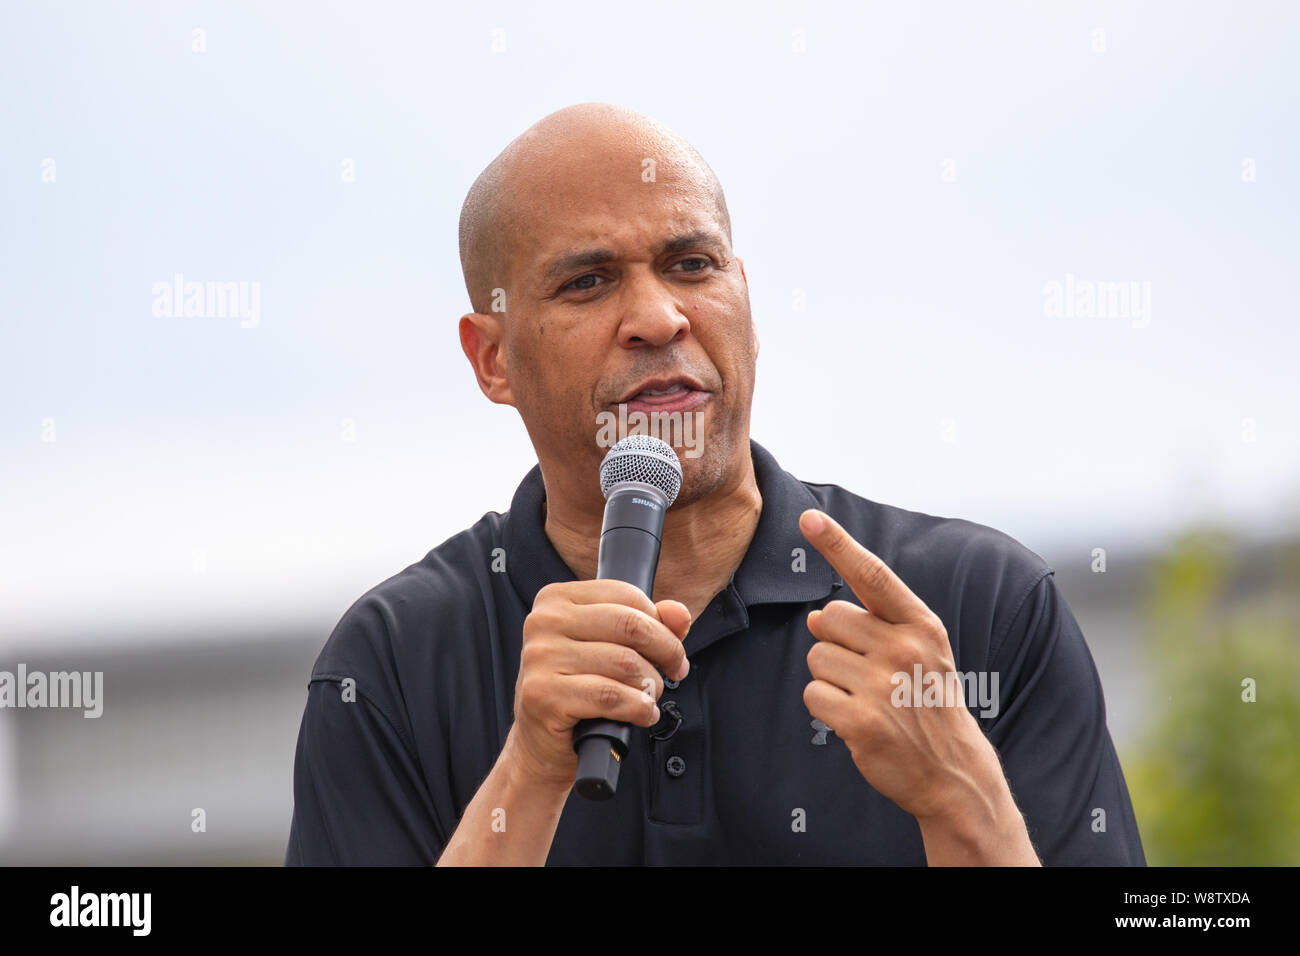 Des Moines, Iowa / USA - August 10, 2019: United States Senator and Democratic presidential candidate Cory Booker greets supporters at the Iowa State Stock Photo